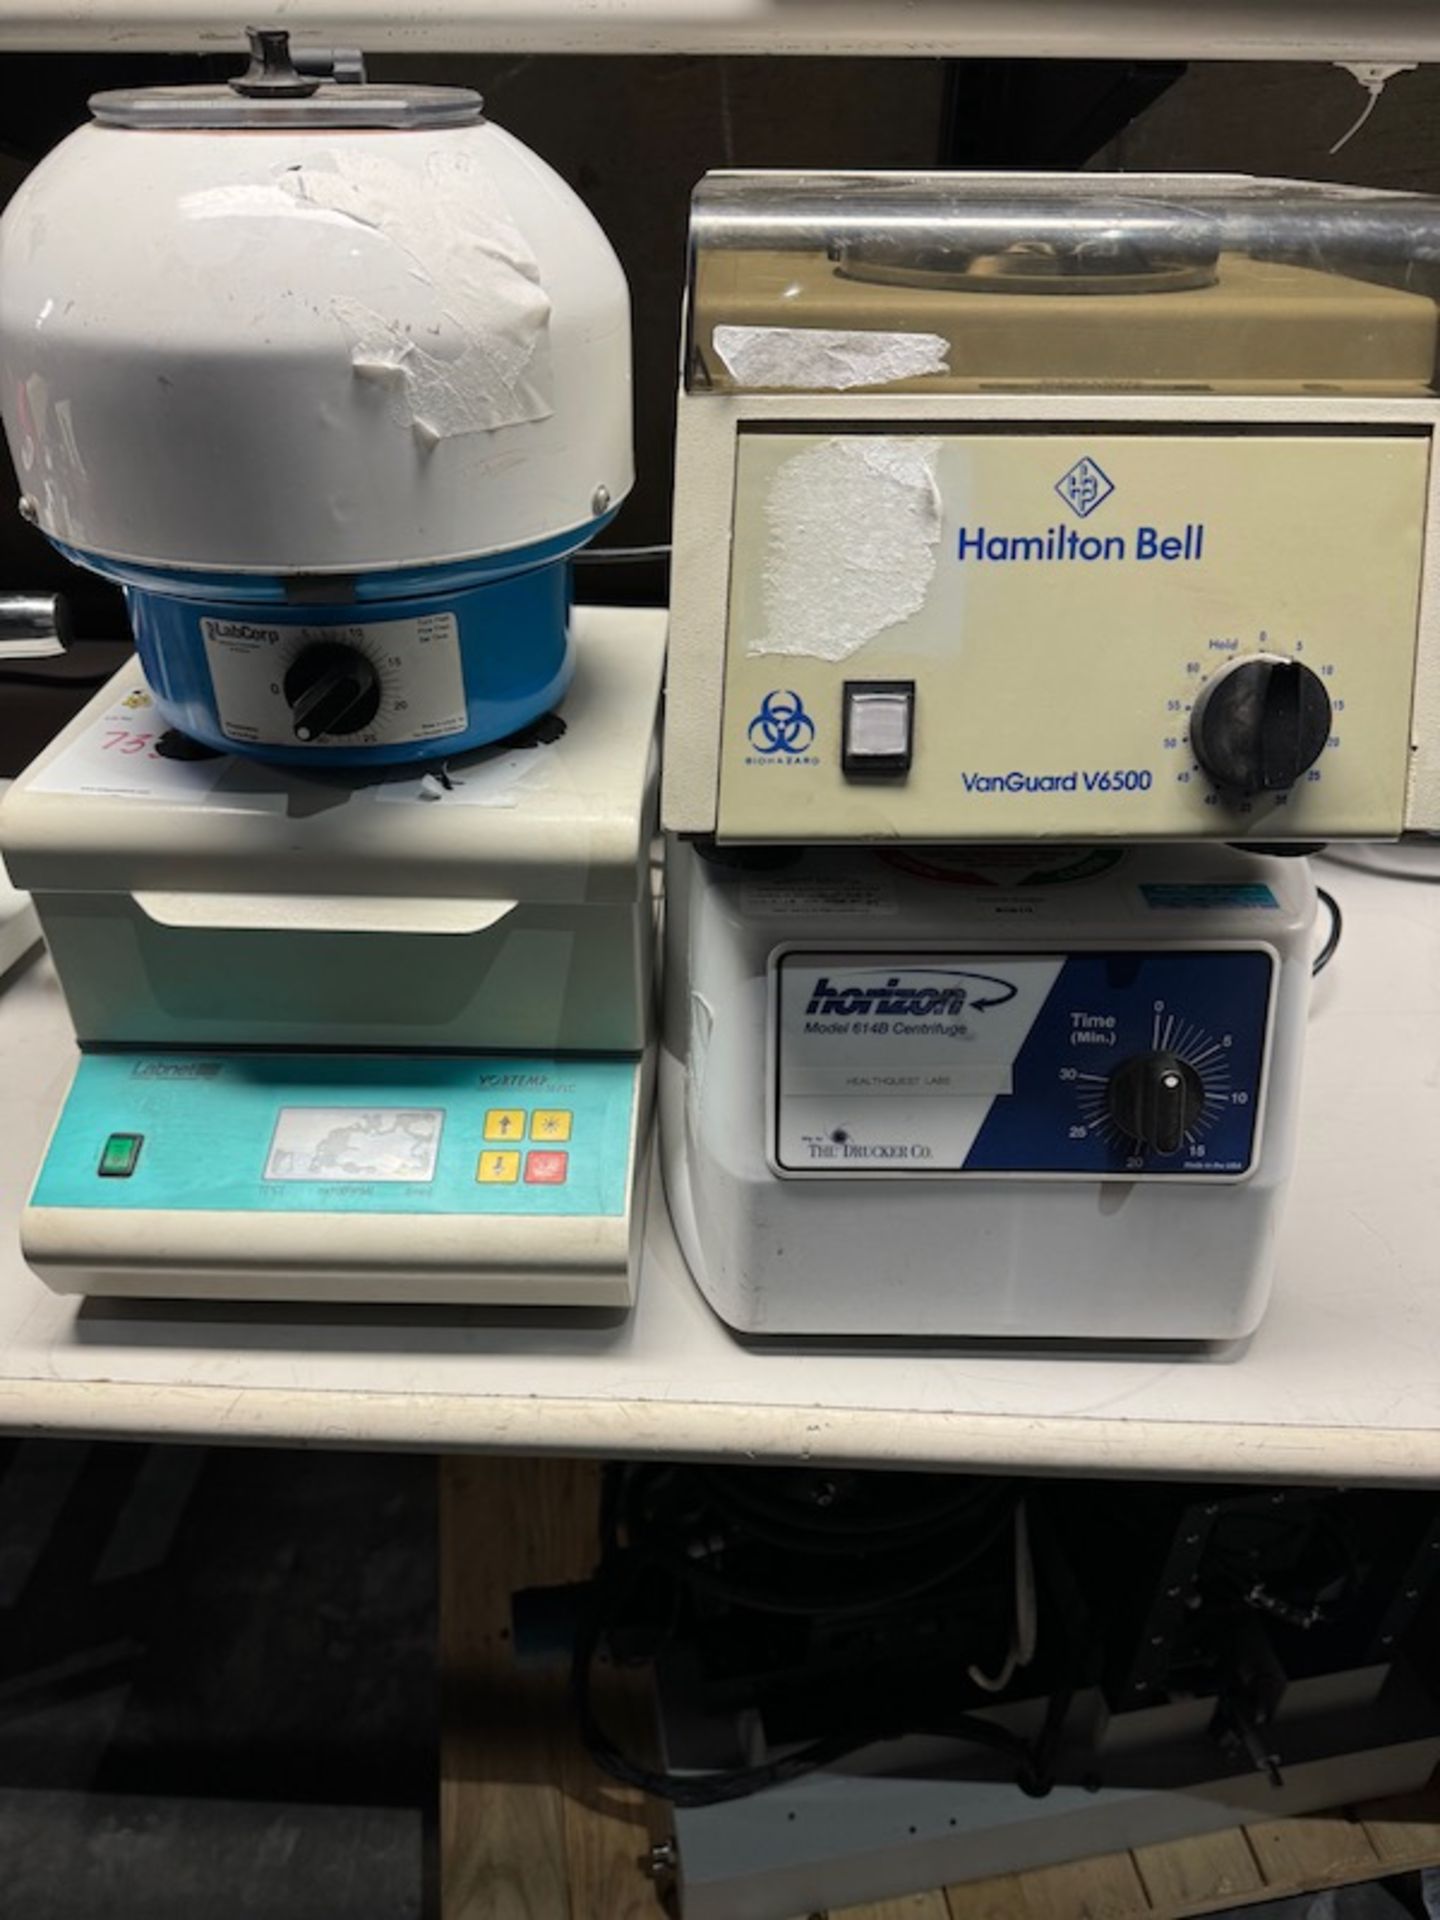 LOT: QTY-4 EPPENDORF CENTRIFUGES CONSISTING OF QTY-2 EPPENDORF 5417 C & QTY-1 5415 C - Image 8 of 10